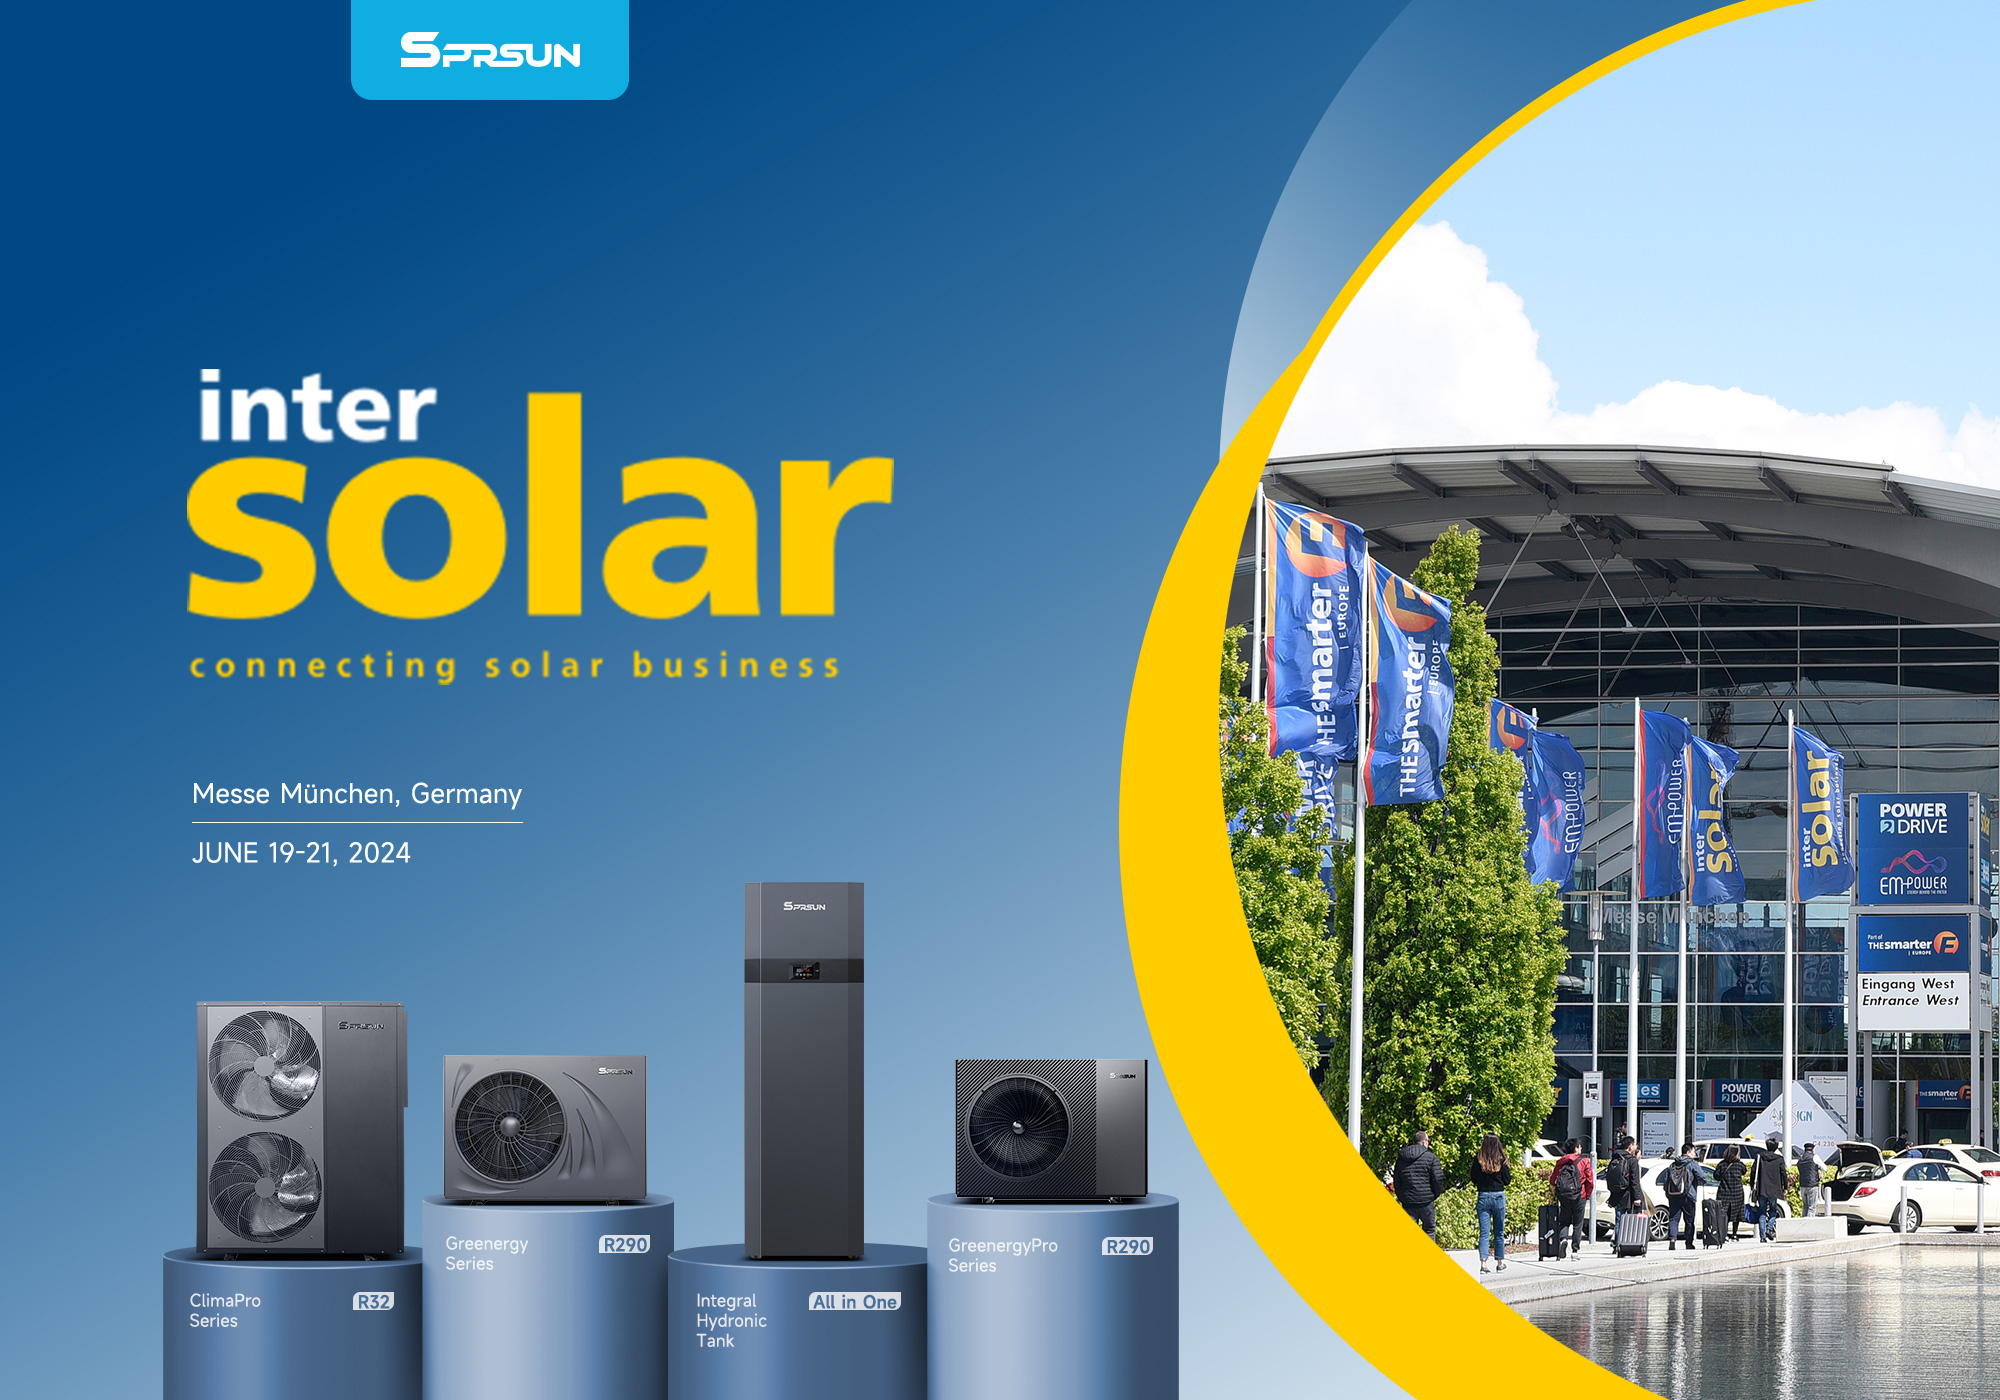 SPRSUN Brings The Latest Heating And Cooling Energy Solutions To This Year's Intersolar Europe